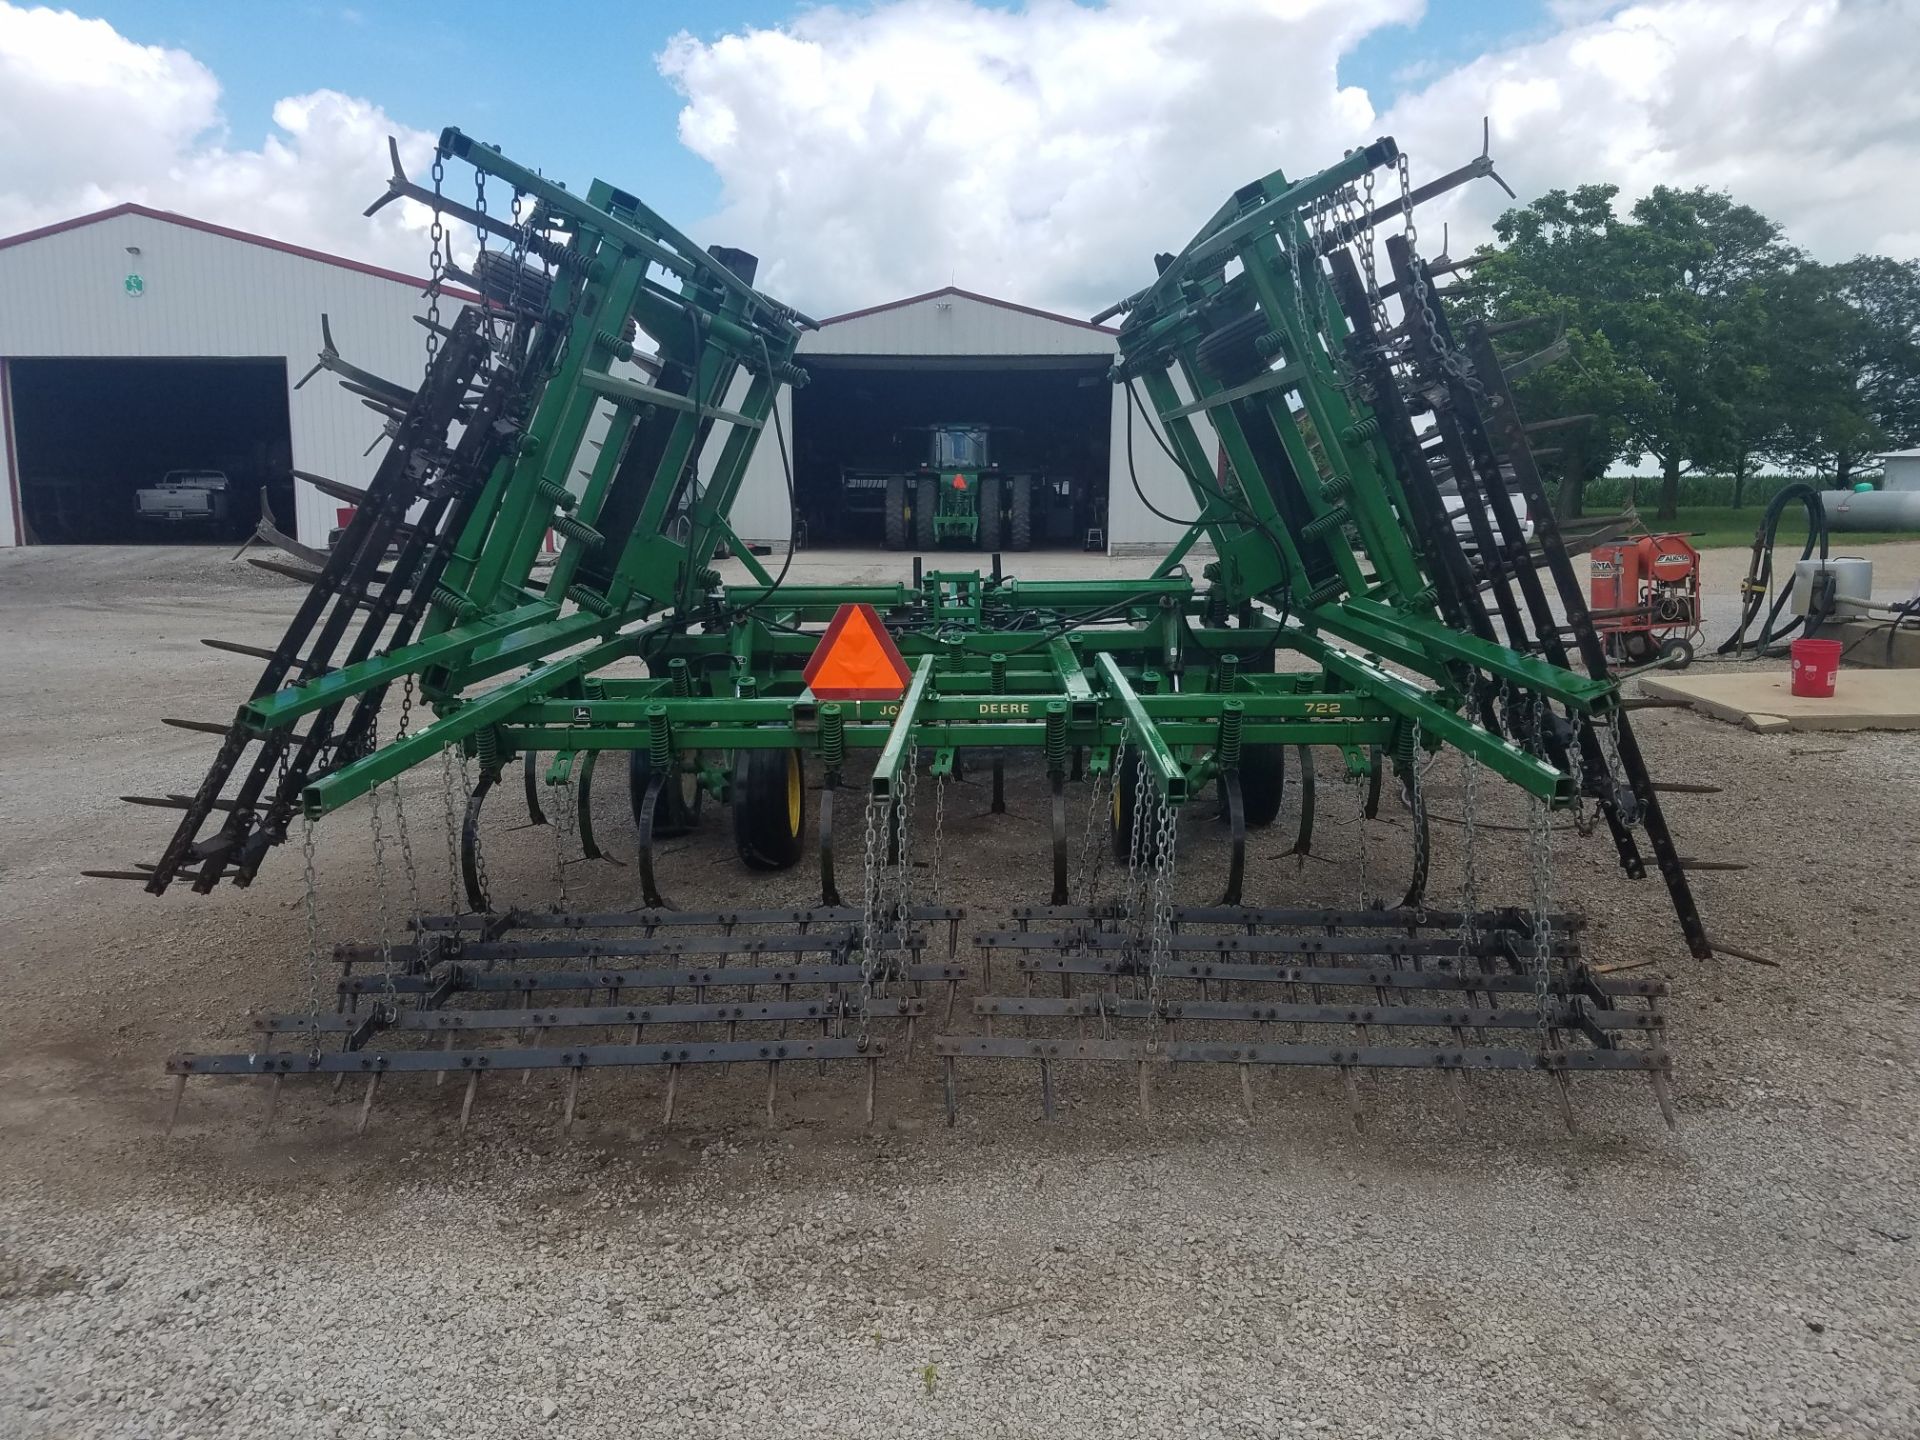 JD 722 24Ft. Soil Finisher, 5 Bar Harrow, Newer Sweeps, Serial #00722X0010685 - Image 5 of 6